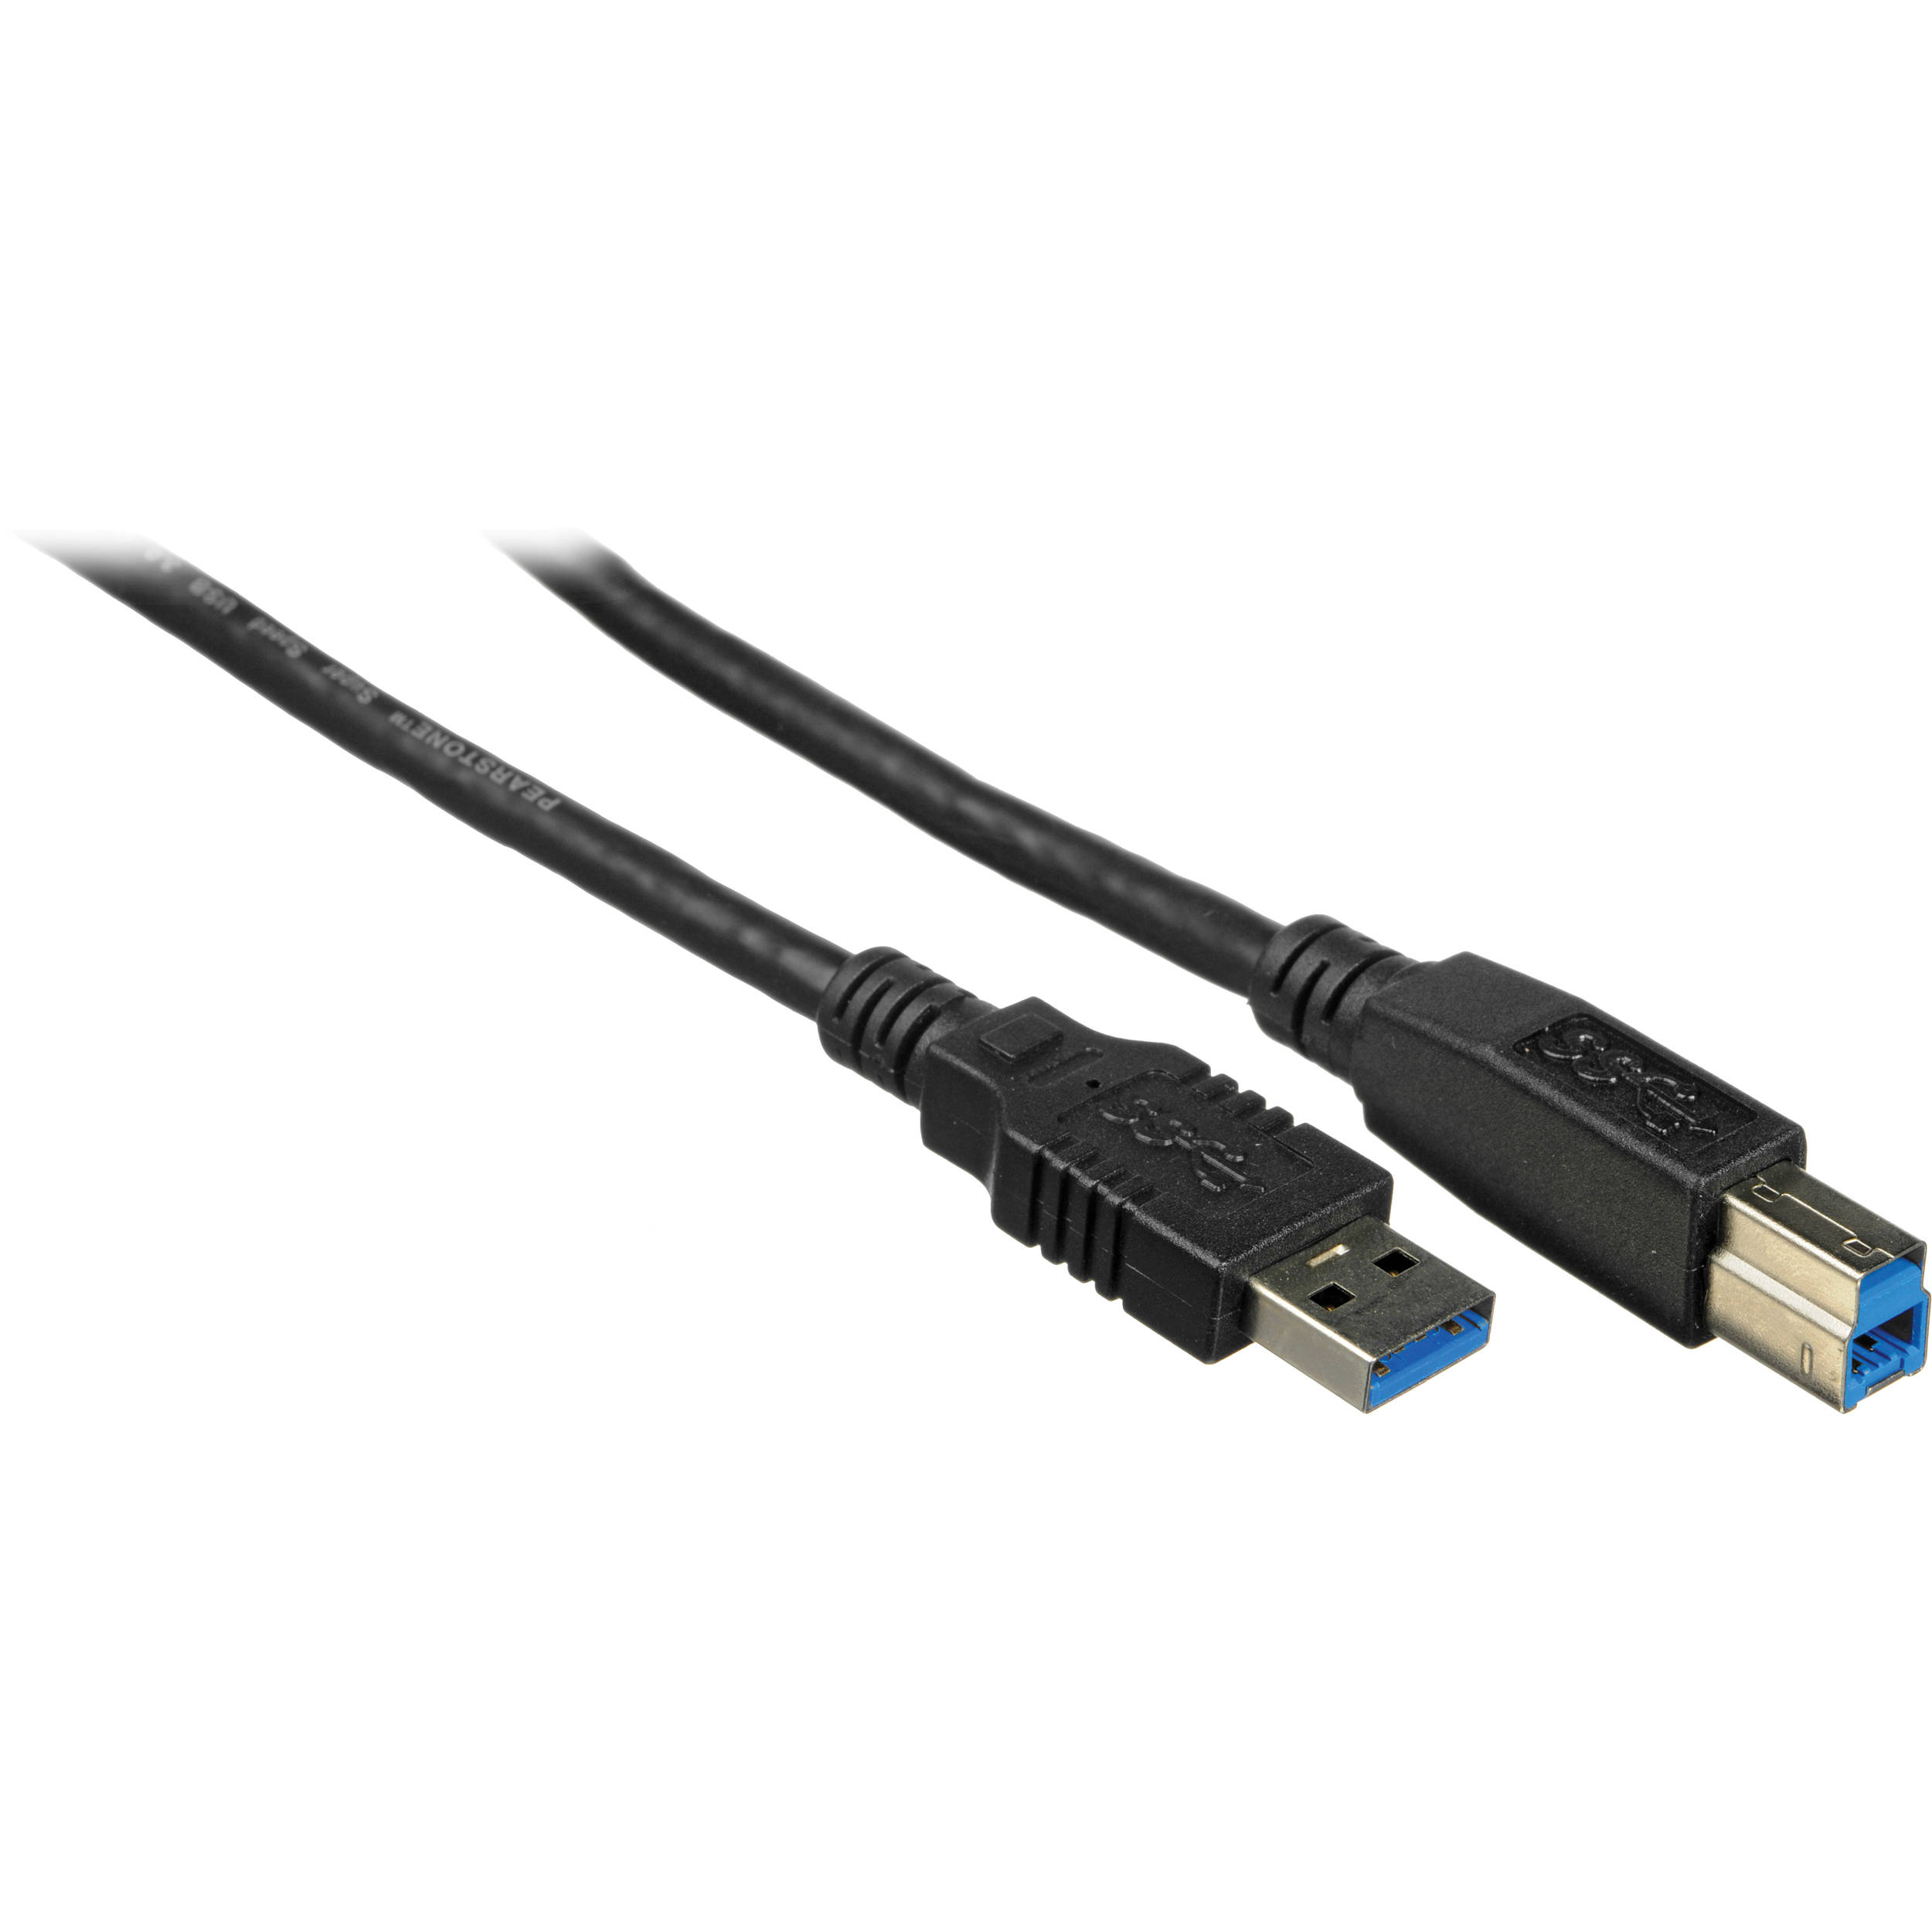 Pearstone Usb 3 0 Type A Male To Type B Male Cable 10